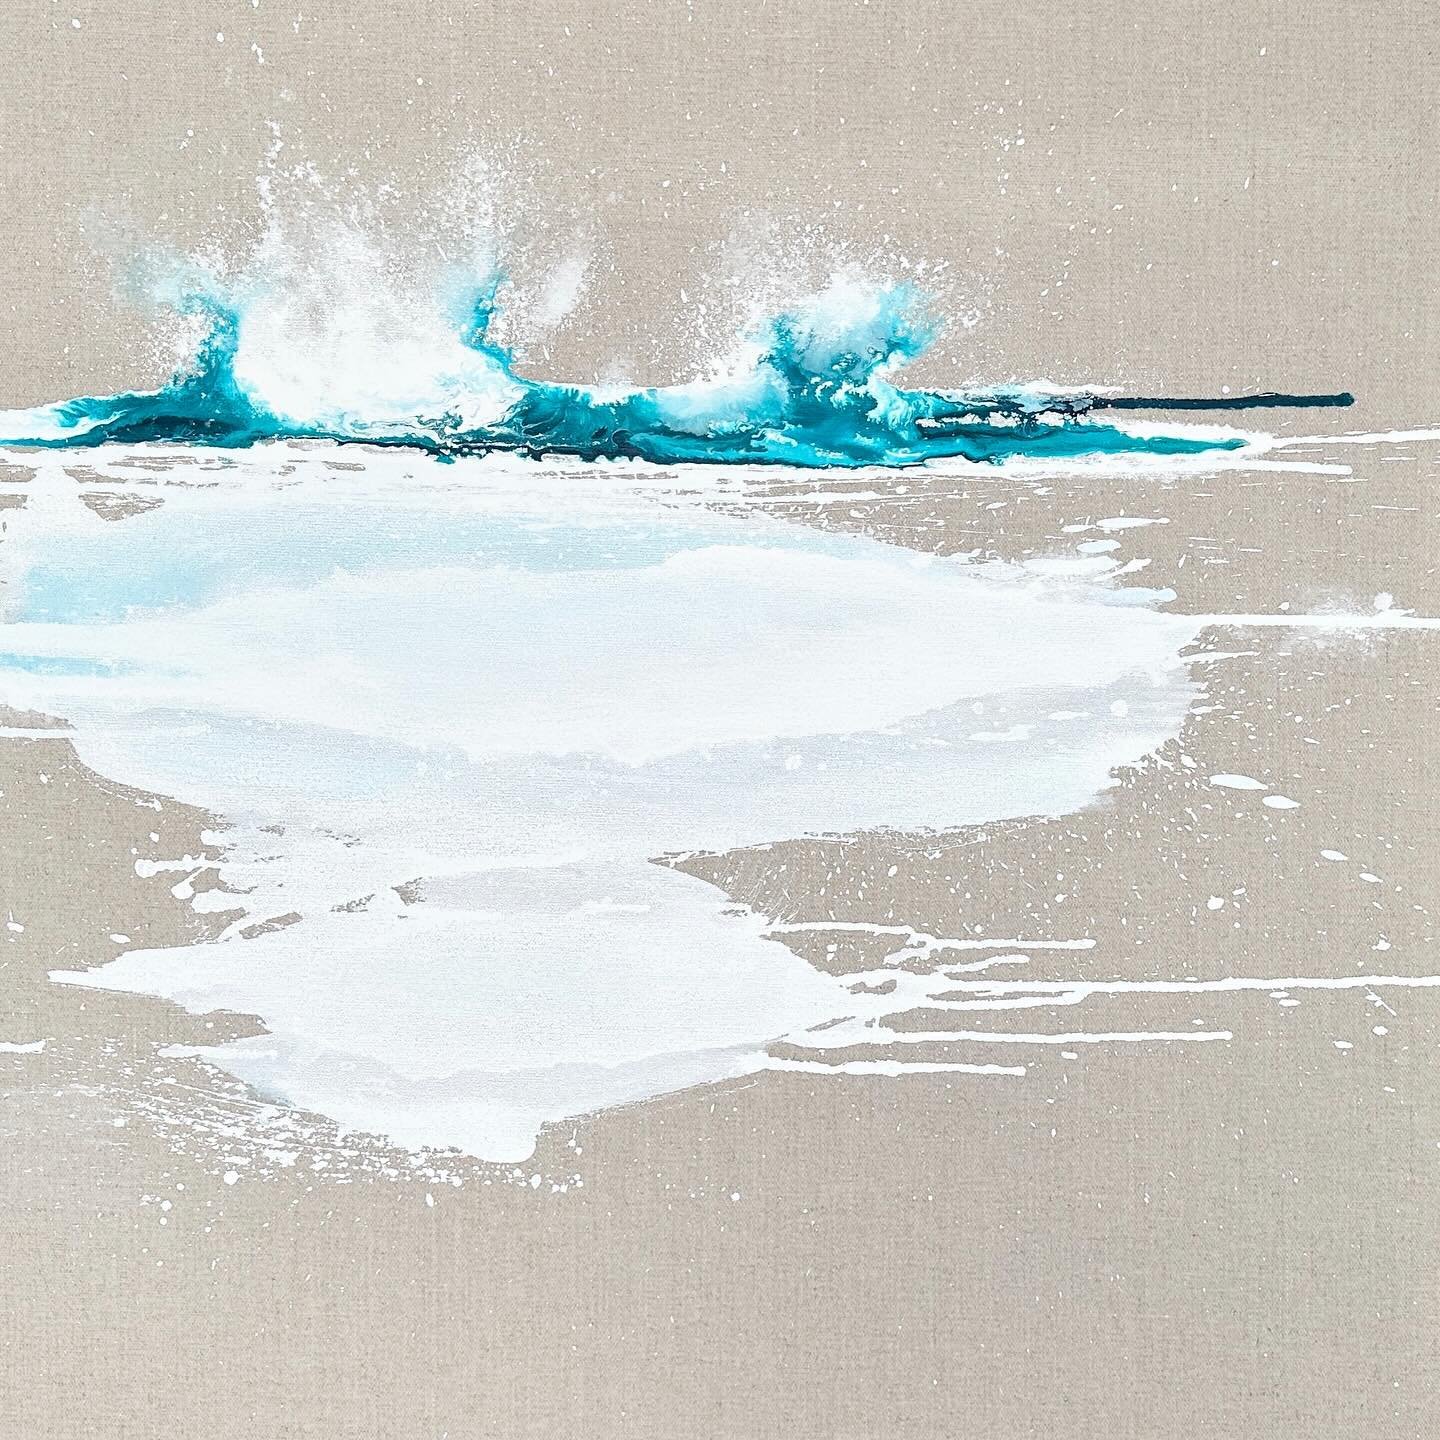 Silence Between My Thoughts

70x50cm&nbsp;Acrylic &amp; Pigment on Canvas
By Kit Johns 🌊 

We are so excited that this painting will be joining us for our next show &lsquo;Body of Water&rsquo; featuring Kit Johns, Jill Hudson, Sophie Elizabeth Moore